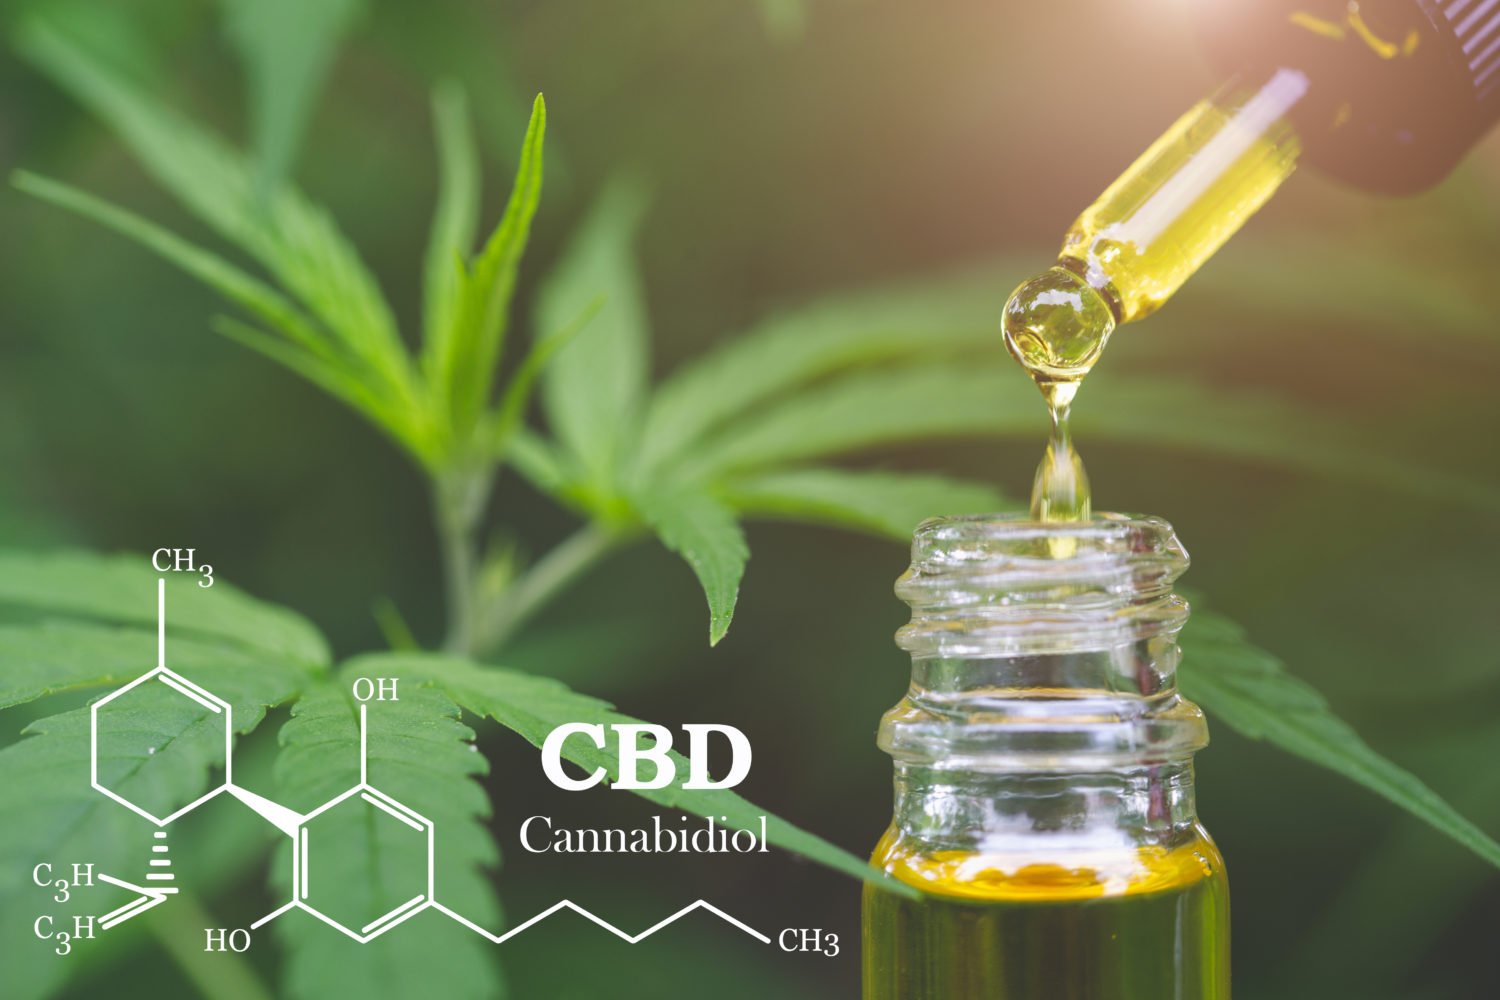 High Cbd Oil Organic Extract Redefined